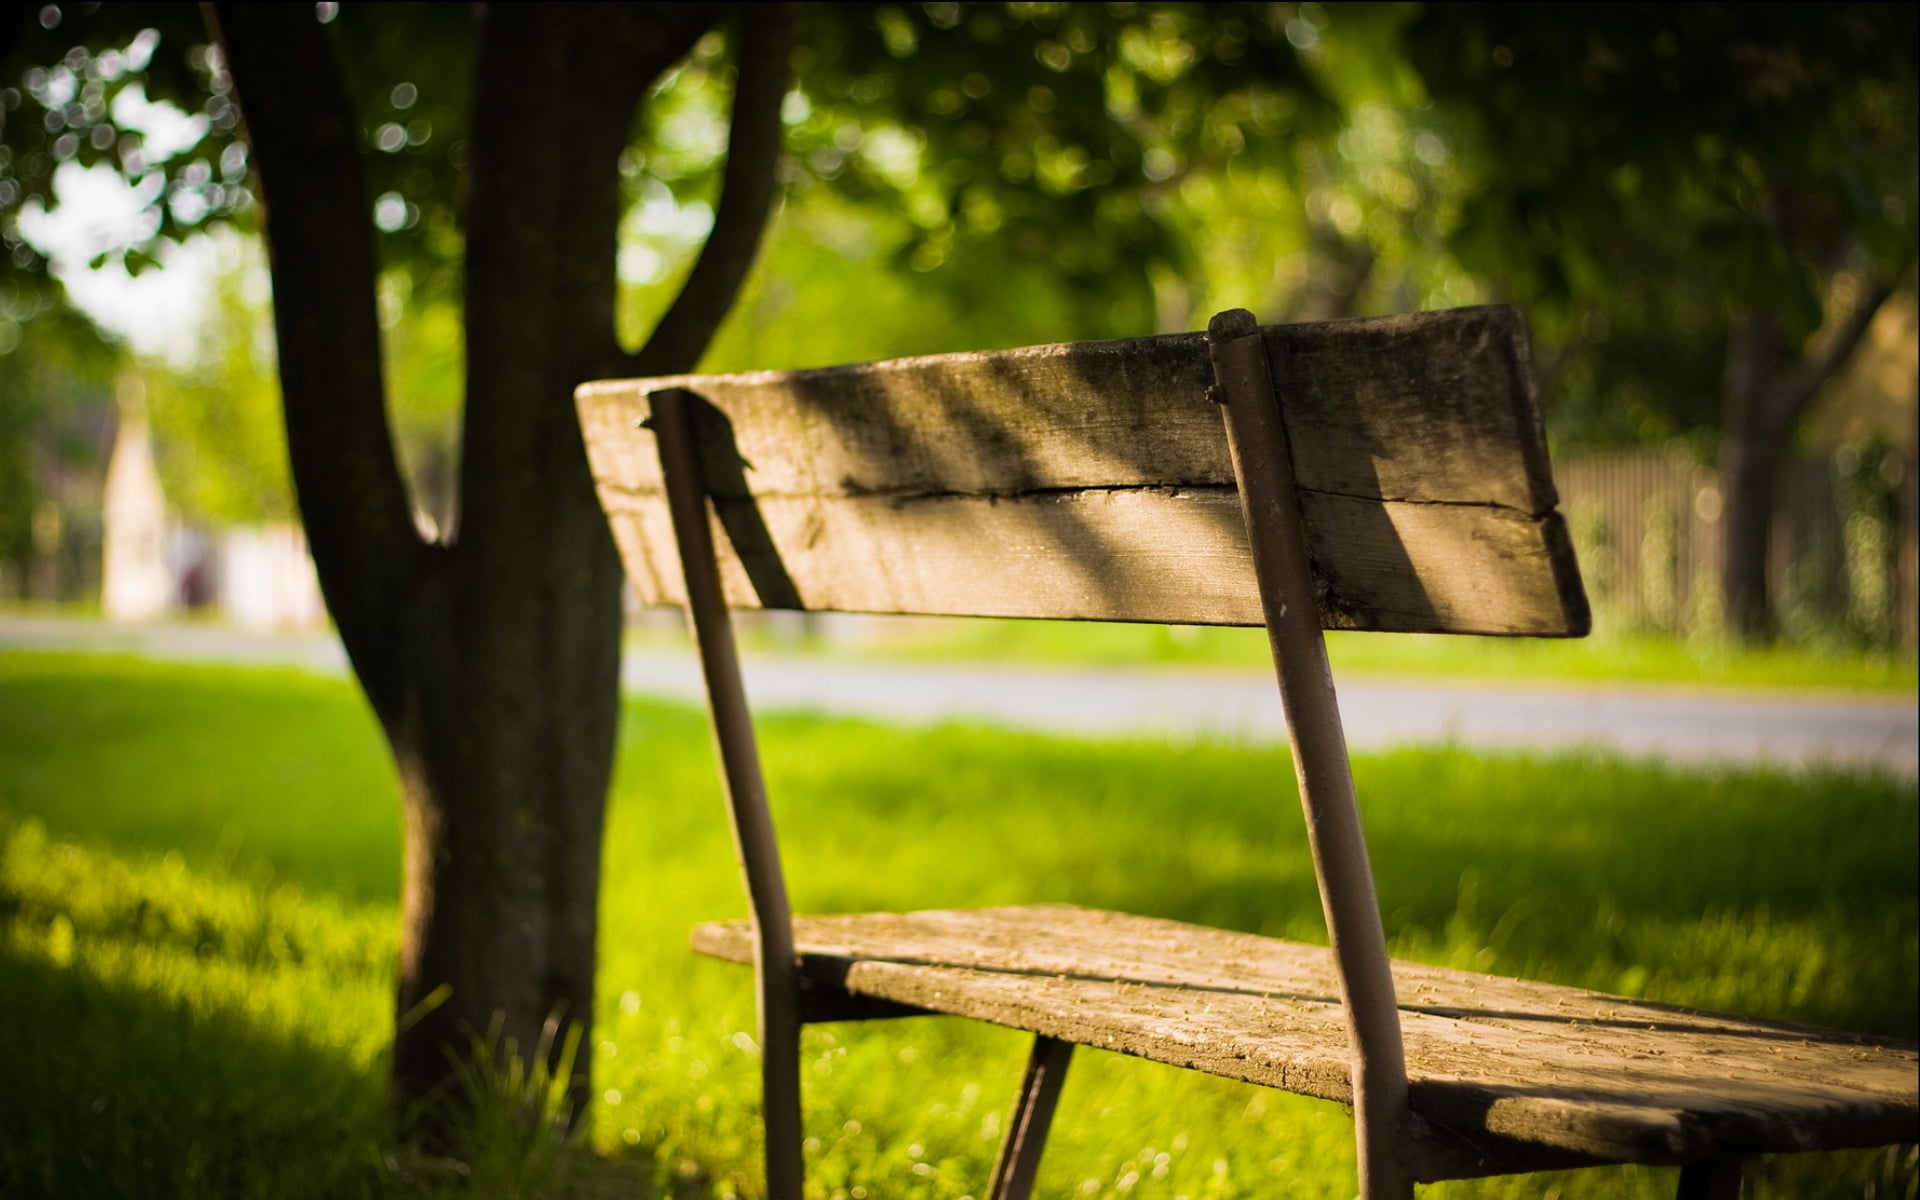 brown wooden outdoor bench, greens, summer, leaves, the sun, rays